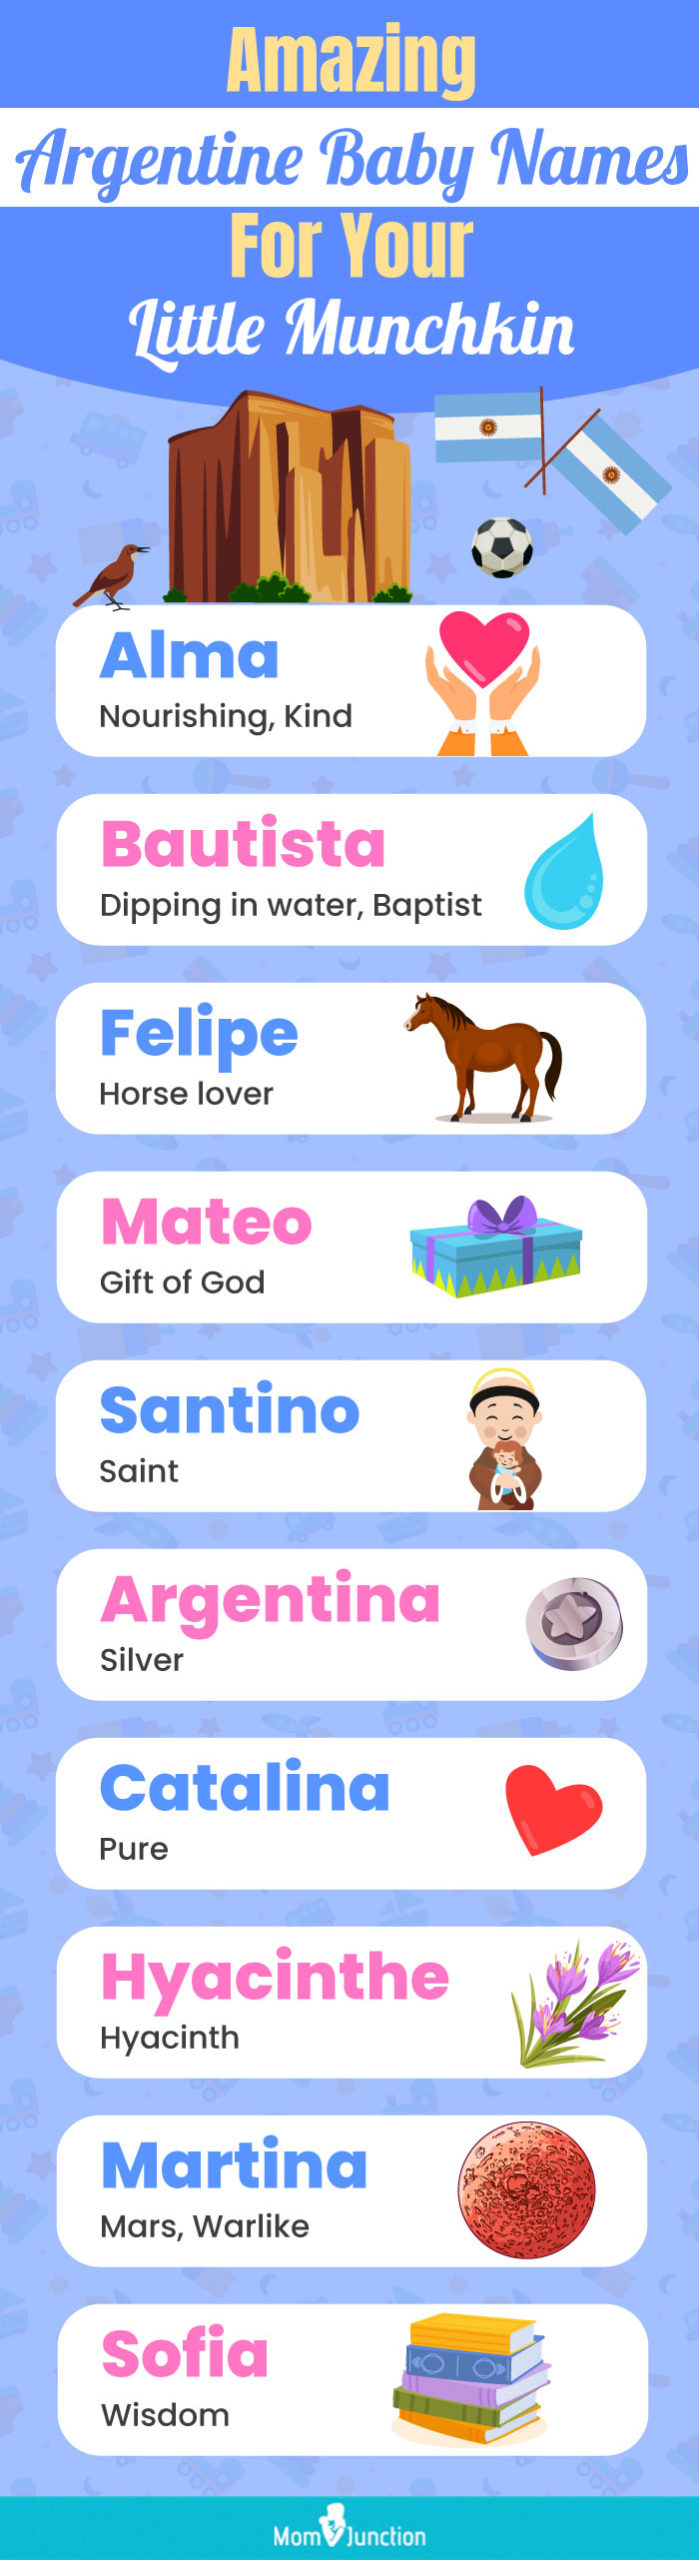 amazing argentine baby names for your little munchkin (infographic)